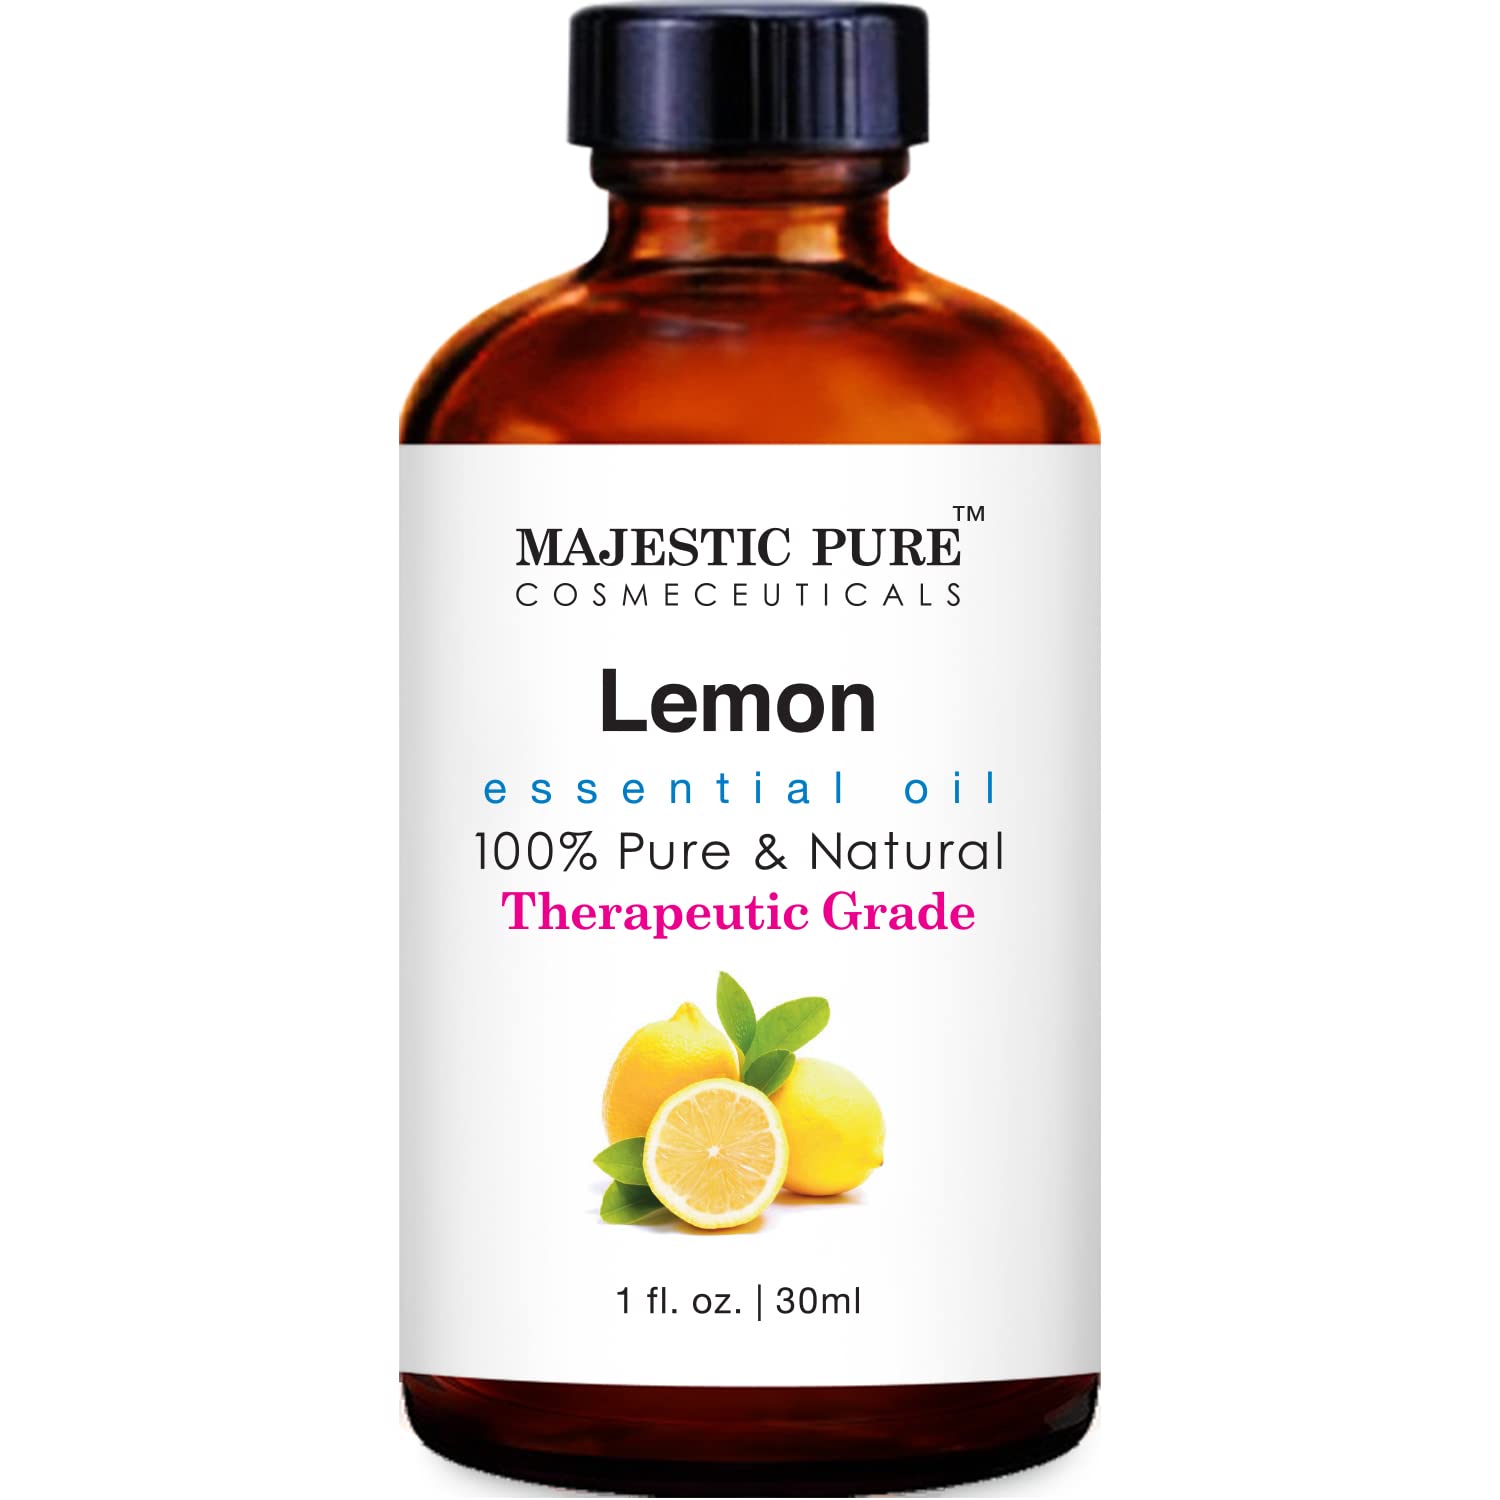 MAJESTIC PURE Lemon Essential Oil, Therapeutic Grade, Pure and Natural, for Aromatherapy, Massage, Topical & Household Uses, 1 fl oz